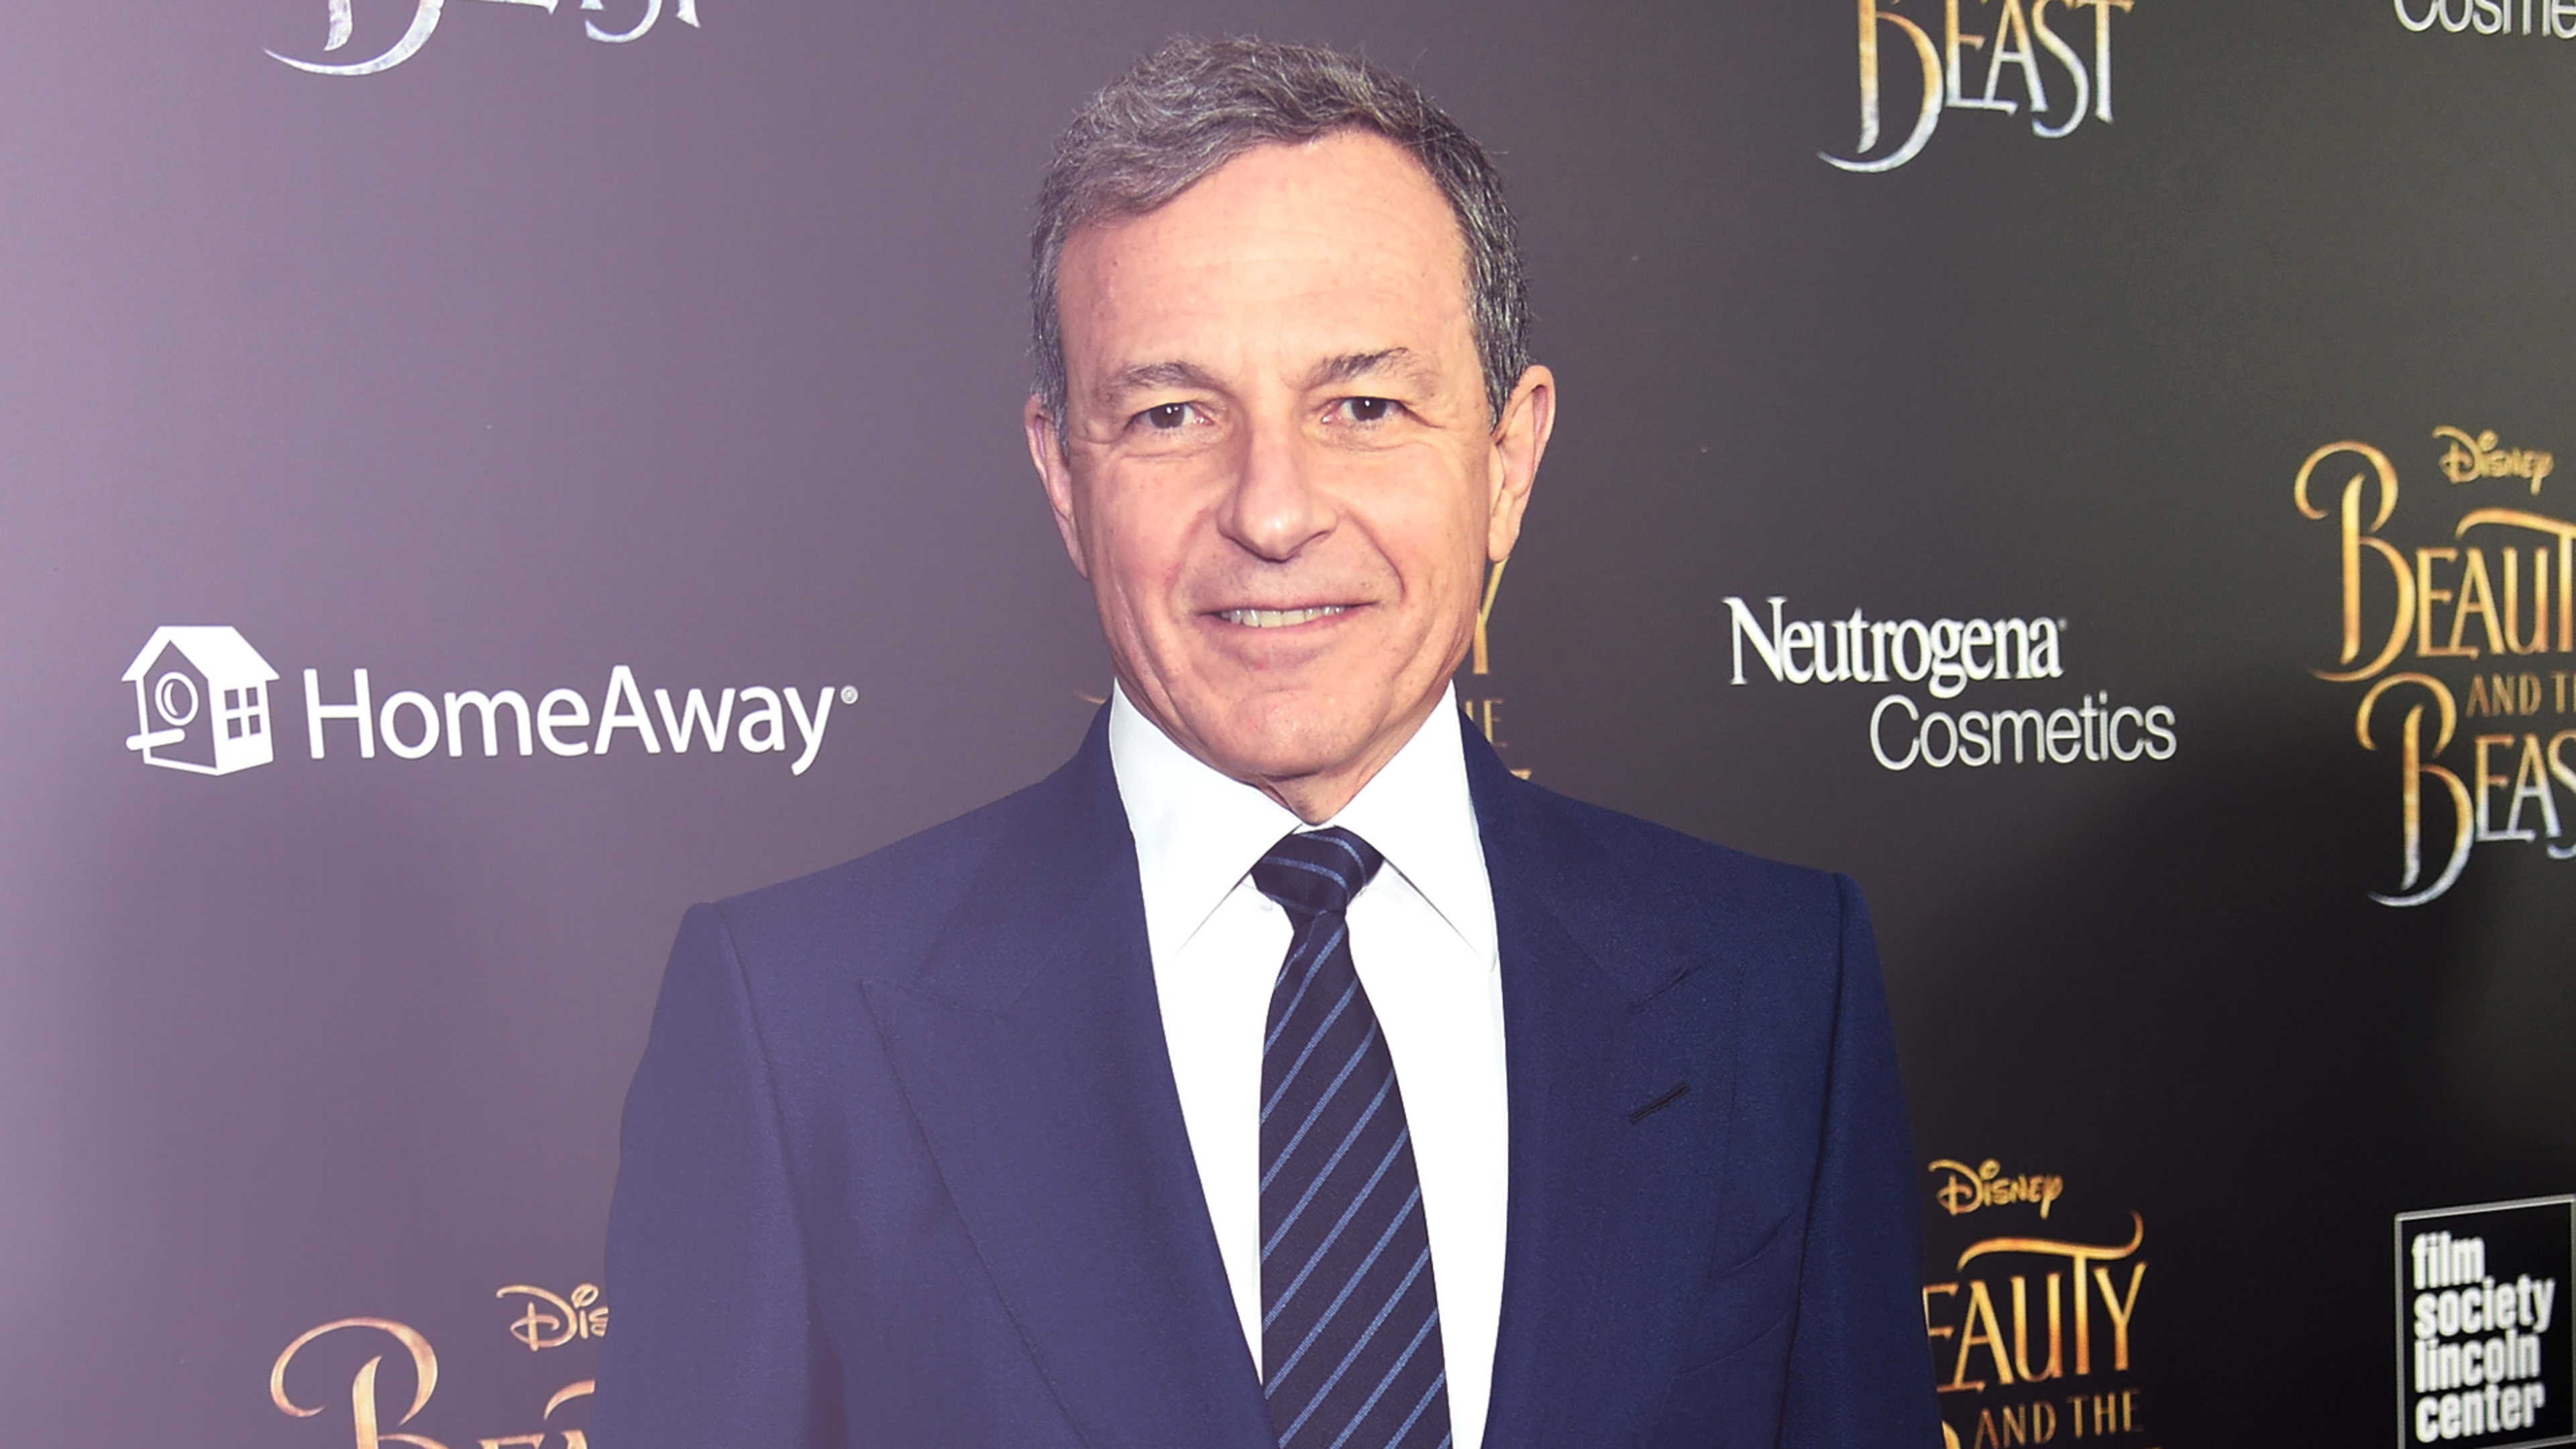 Bob Iger Spills Details About Disney’s ESPN And Netflix-Like Streaming Services